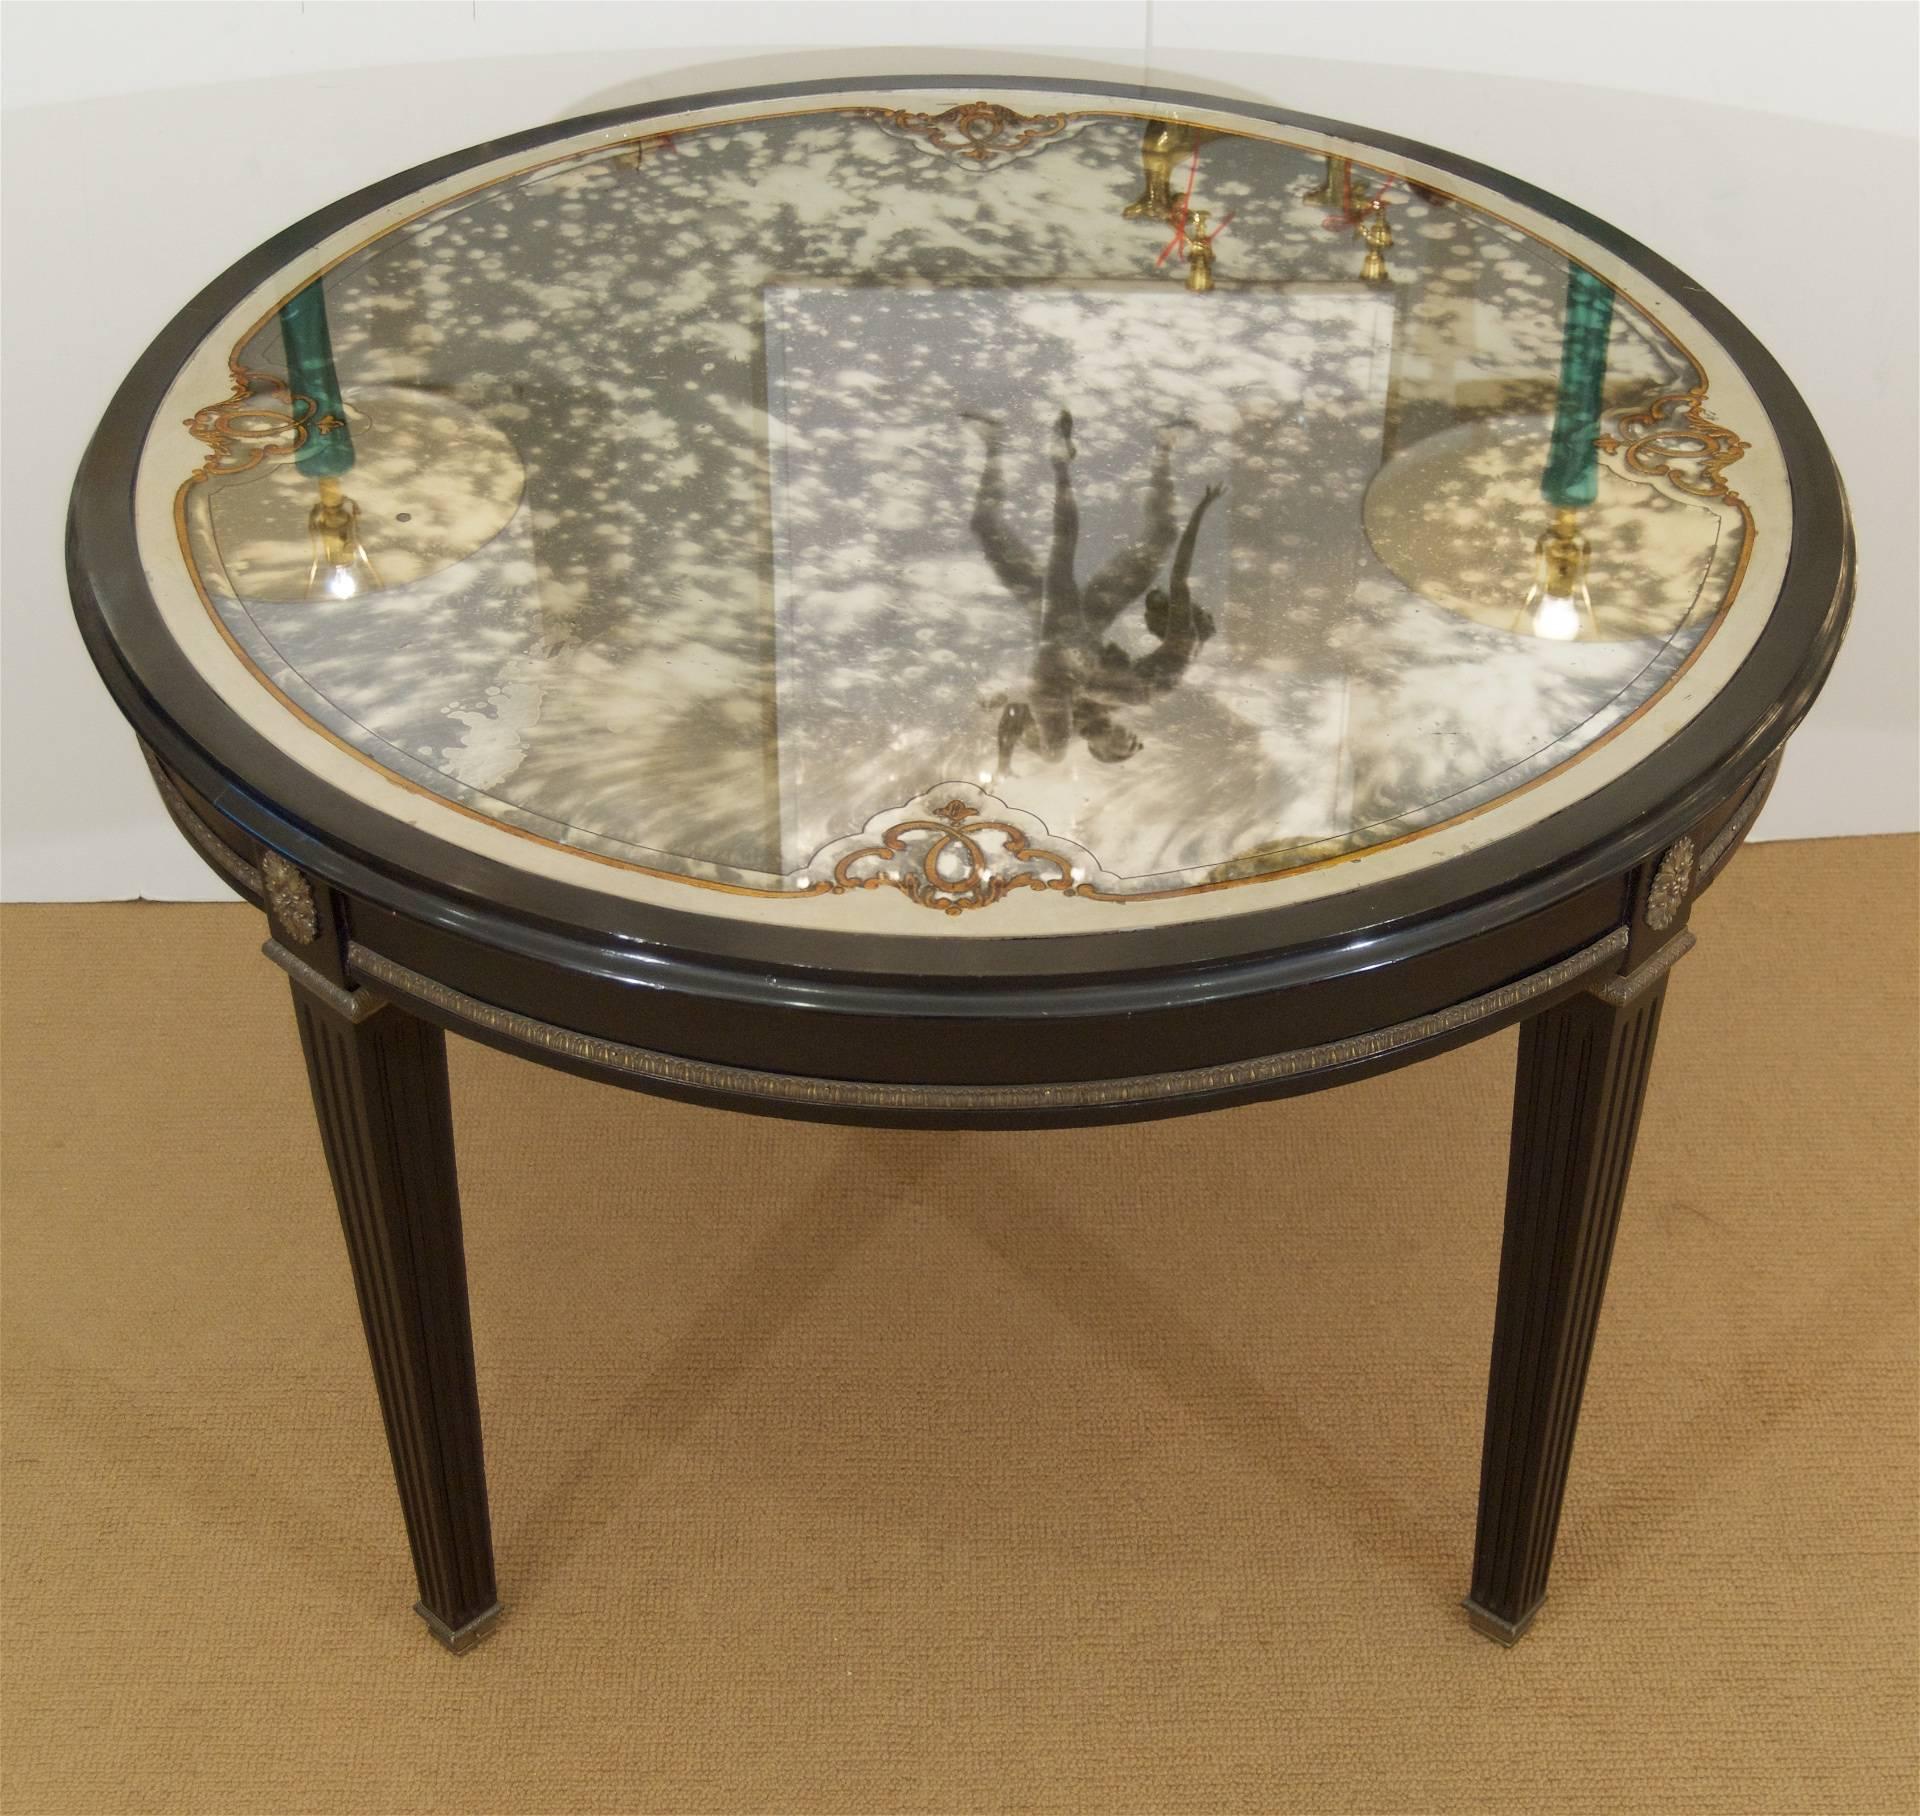 Jansen (Stamped) Black Lacquer Center/Dining Table with Eglomisé Glass Top In Excellent Condition For Sale In Stamford, CT